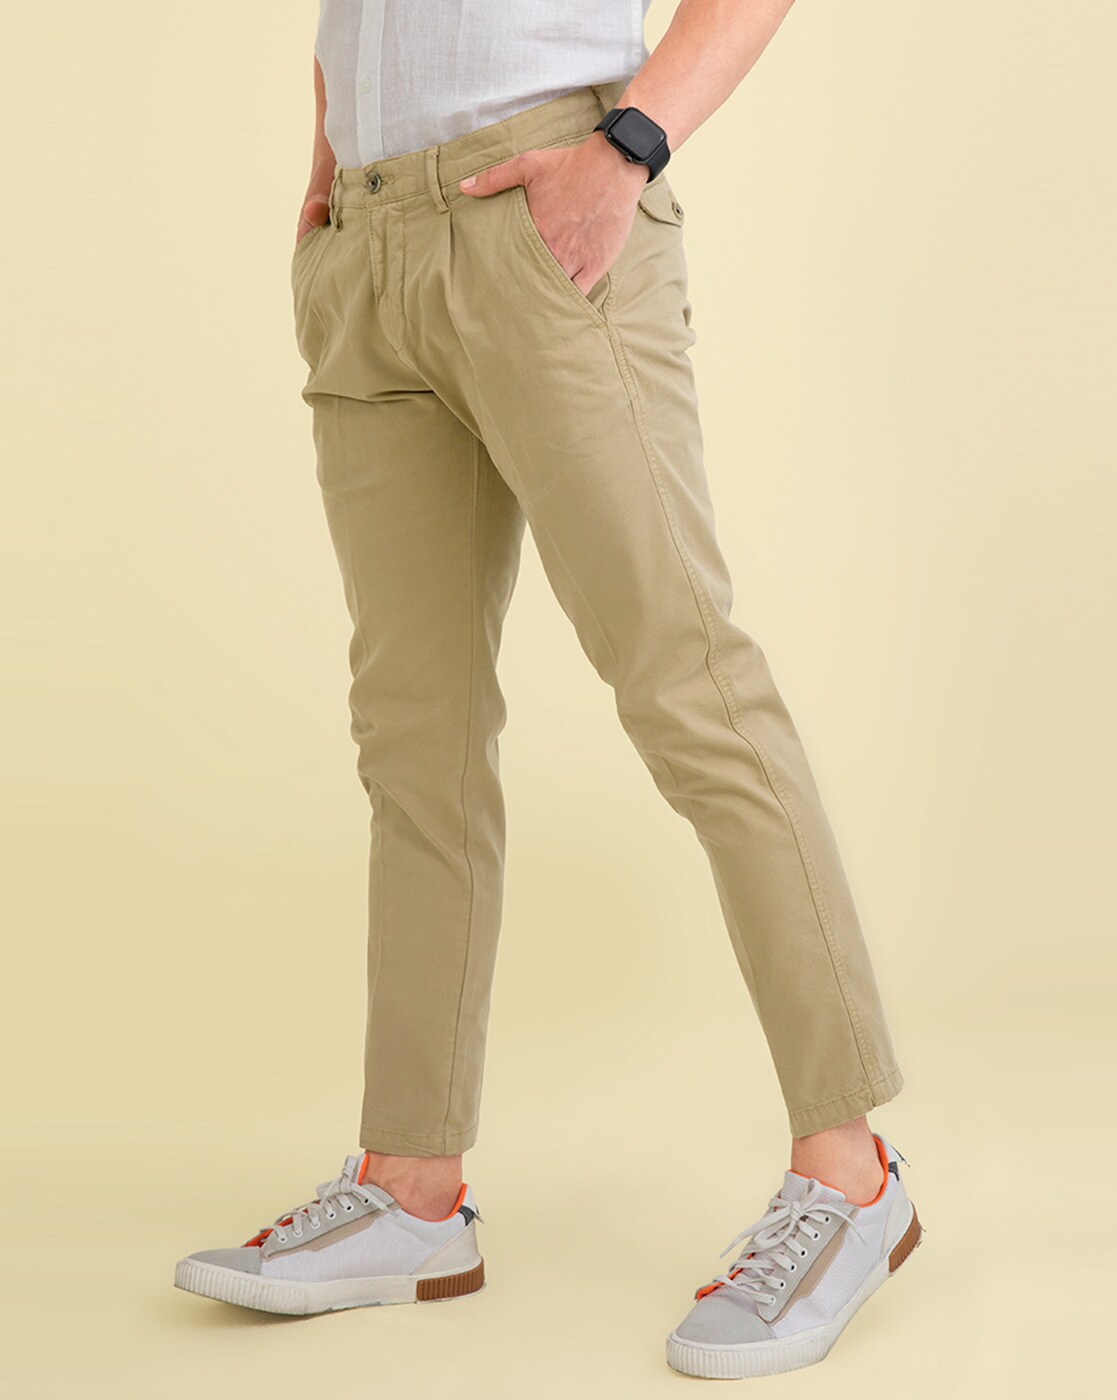 Alex Mill Standard Pleated Chino Review Endorsement and Where to Buy